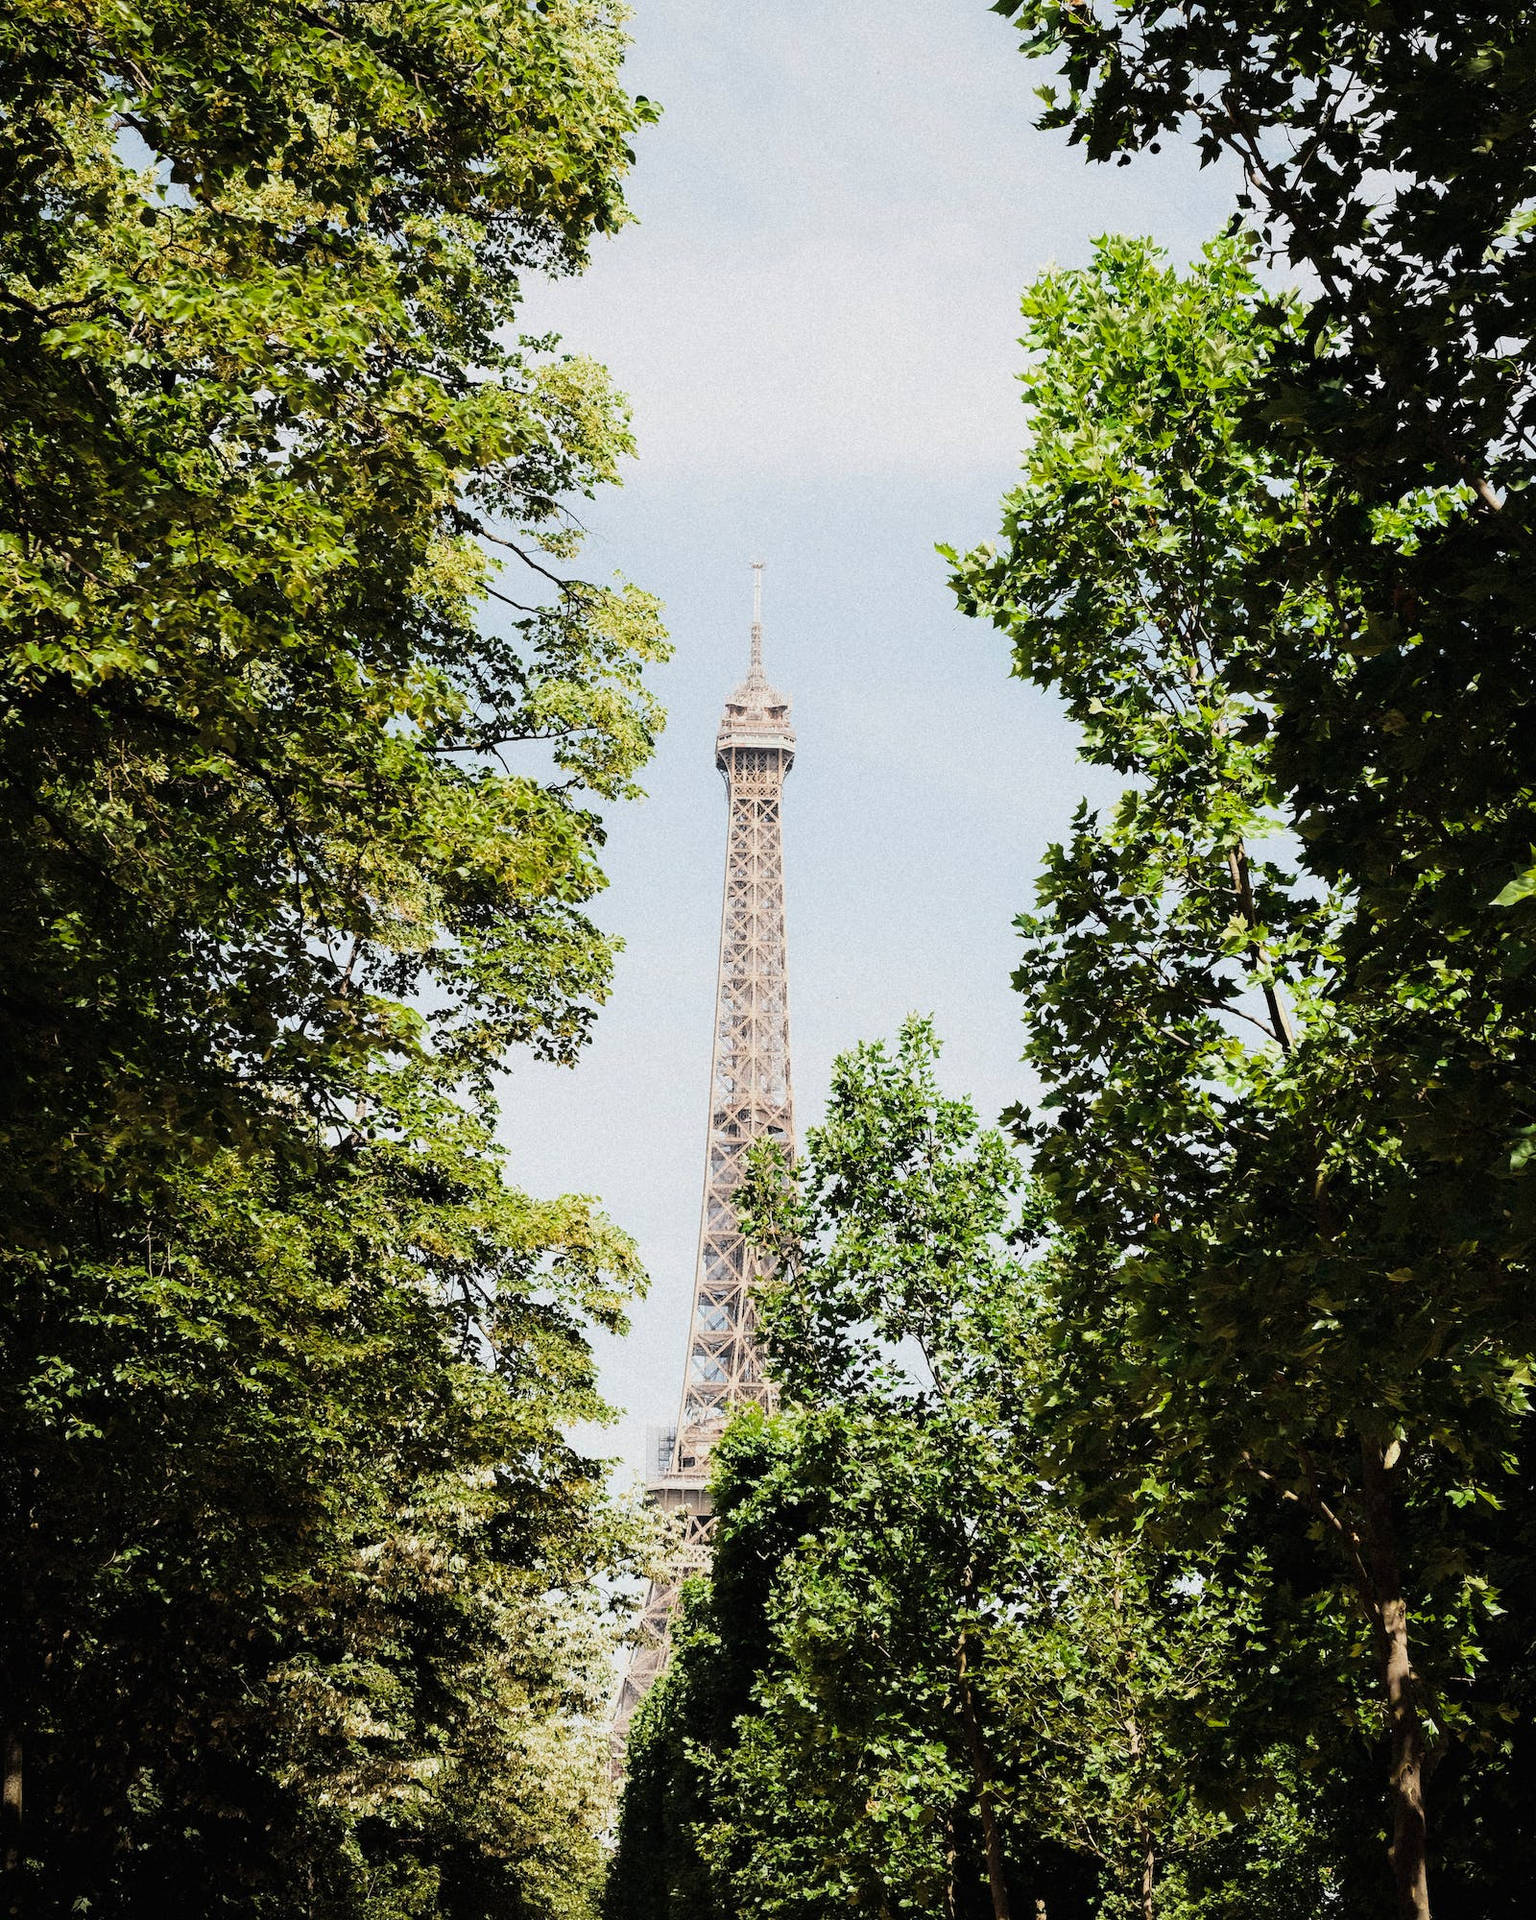 Distant Eiffel Tower In France Iphone Wallpaper